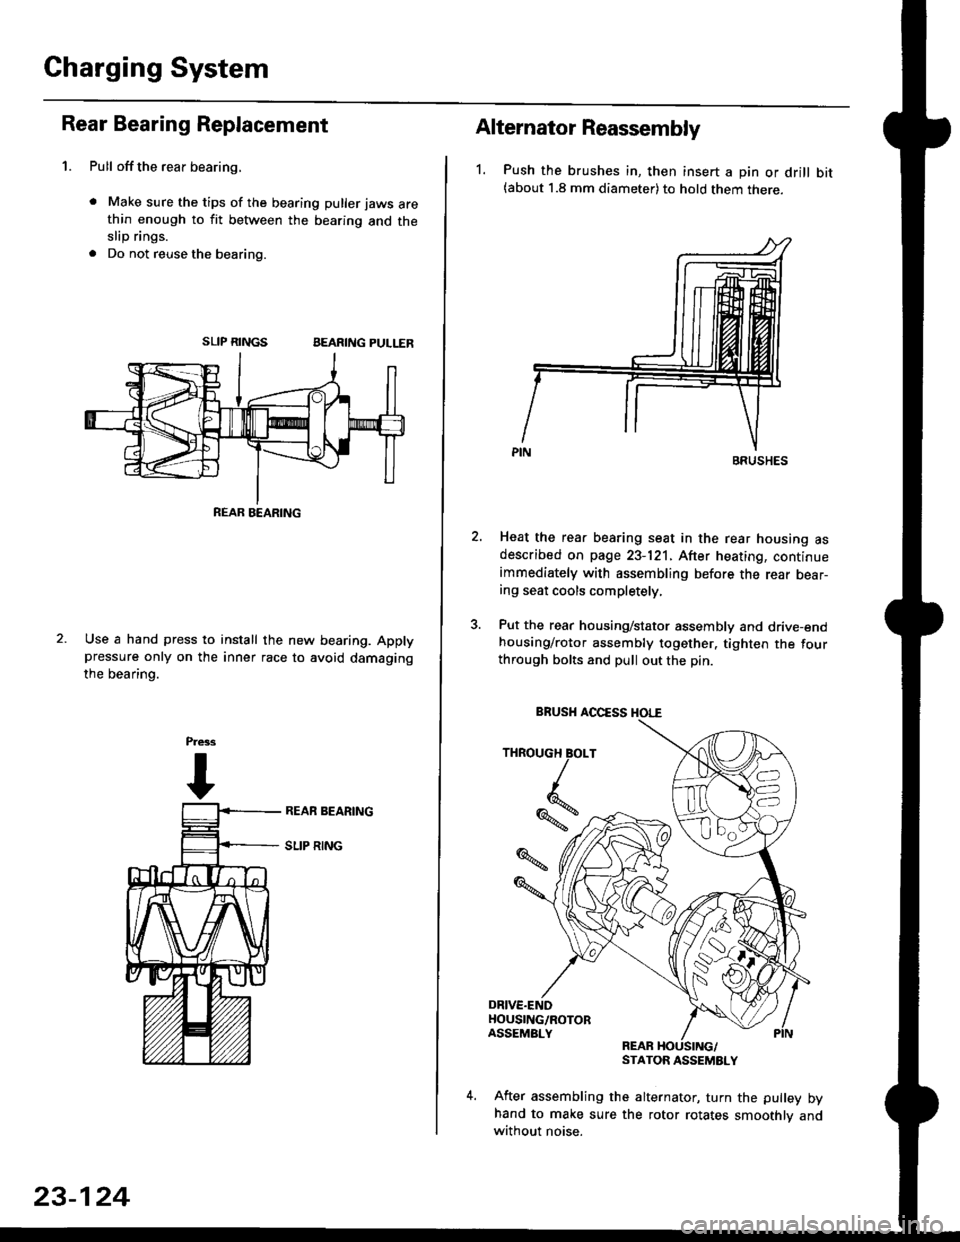 HONDA CIVIC 1997 6.G Owners Manual Gharging System
Rear Bearing Replacement
1. Pull offthe rear bearing,
. Make sure the tips of the bearing puller jaws arethin enough to fit between the bearing and theslip rings.
. Do not reuse the be